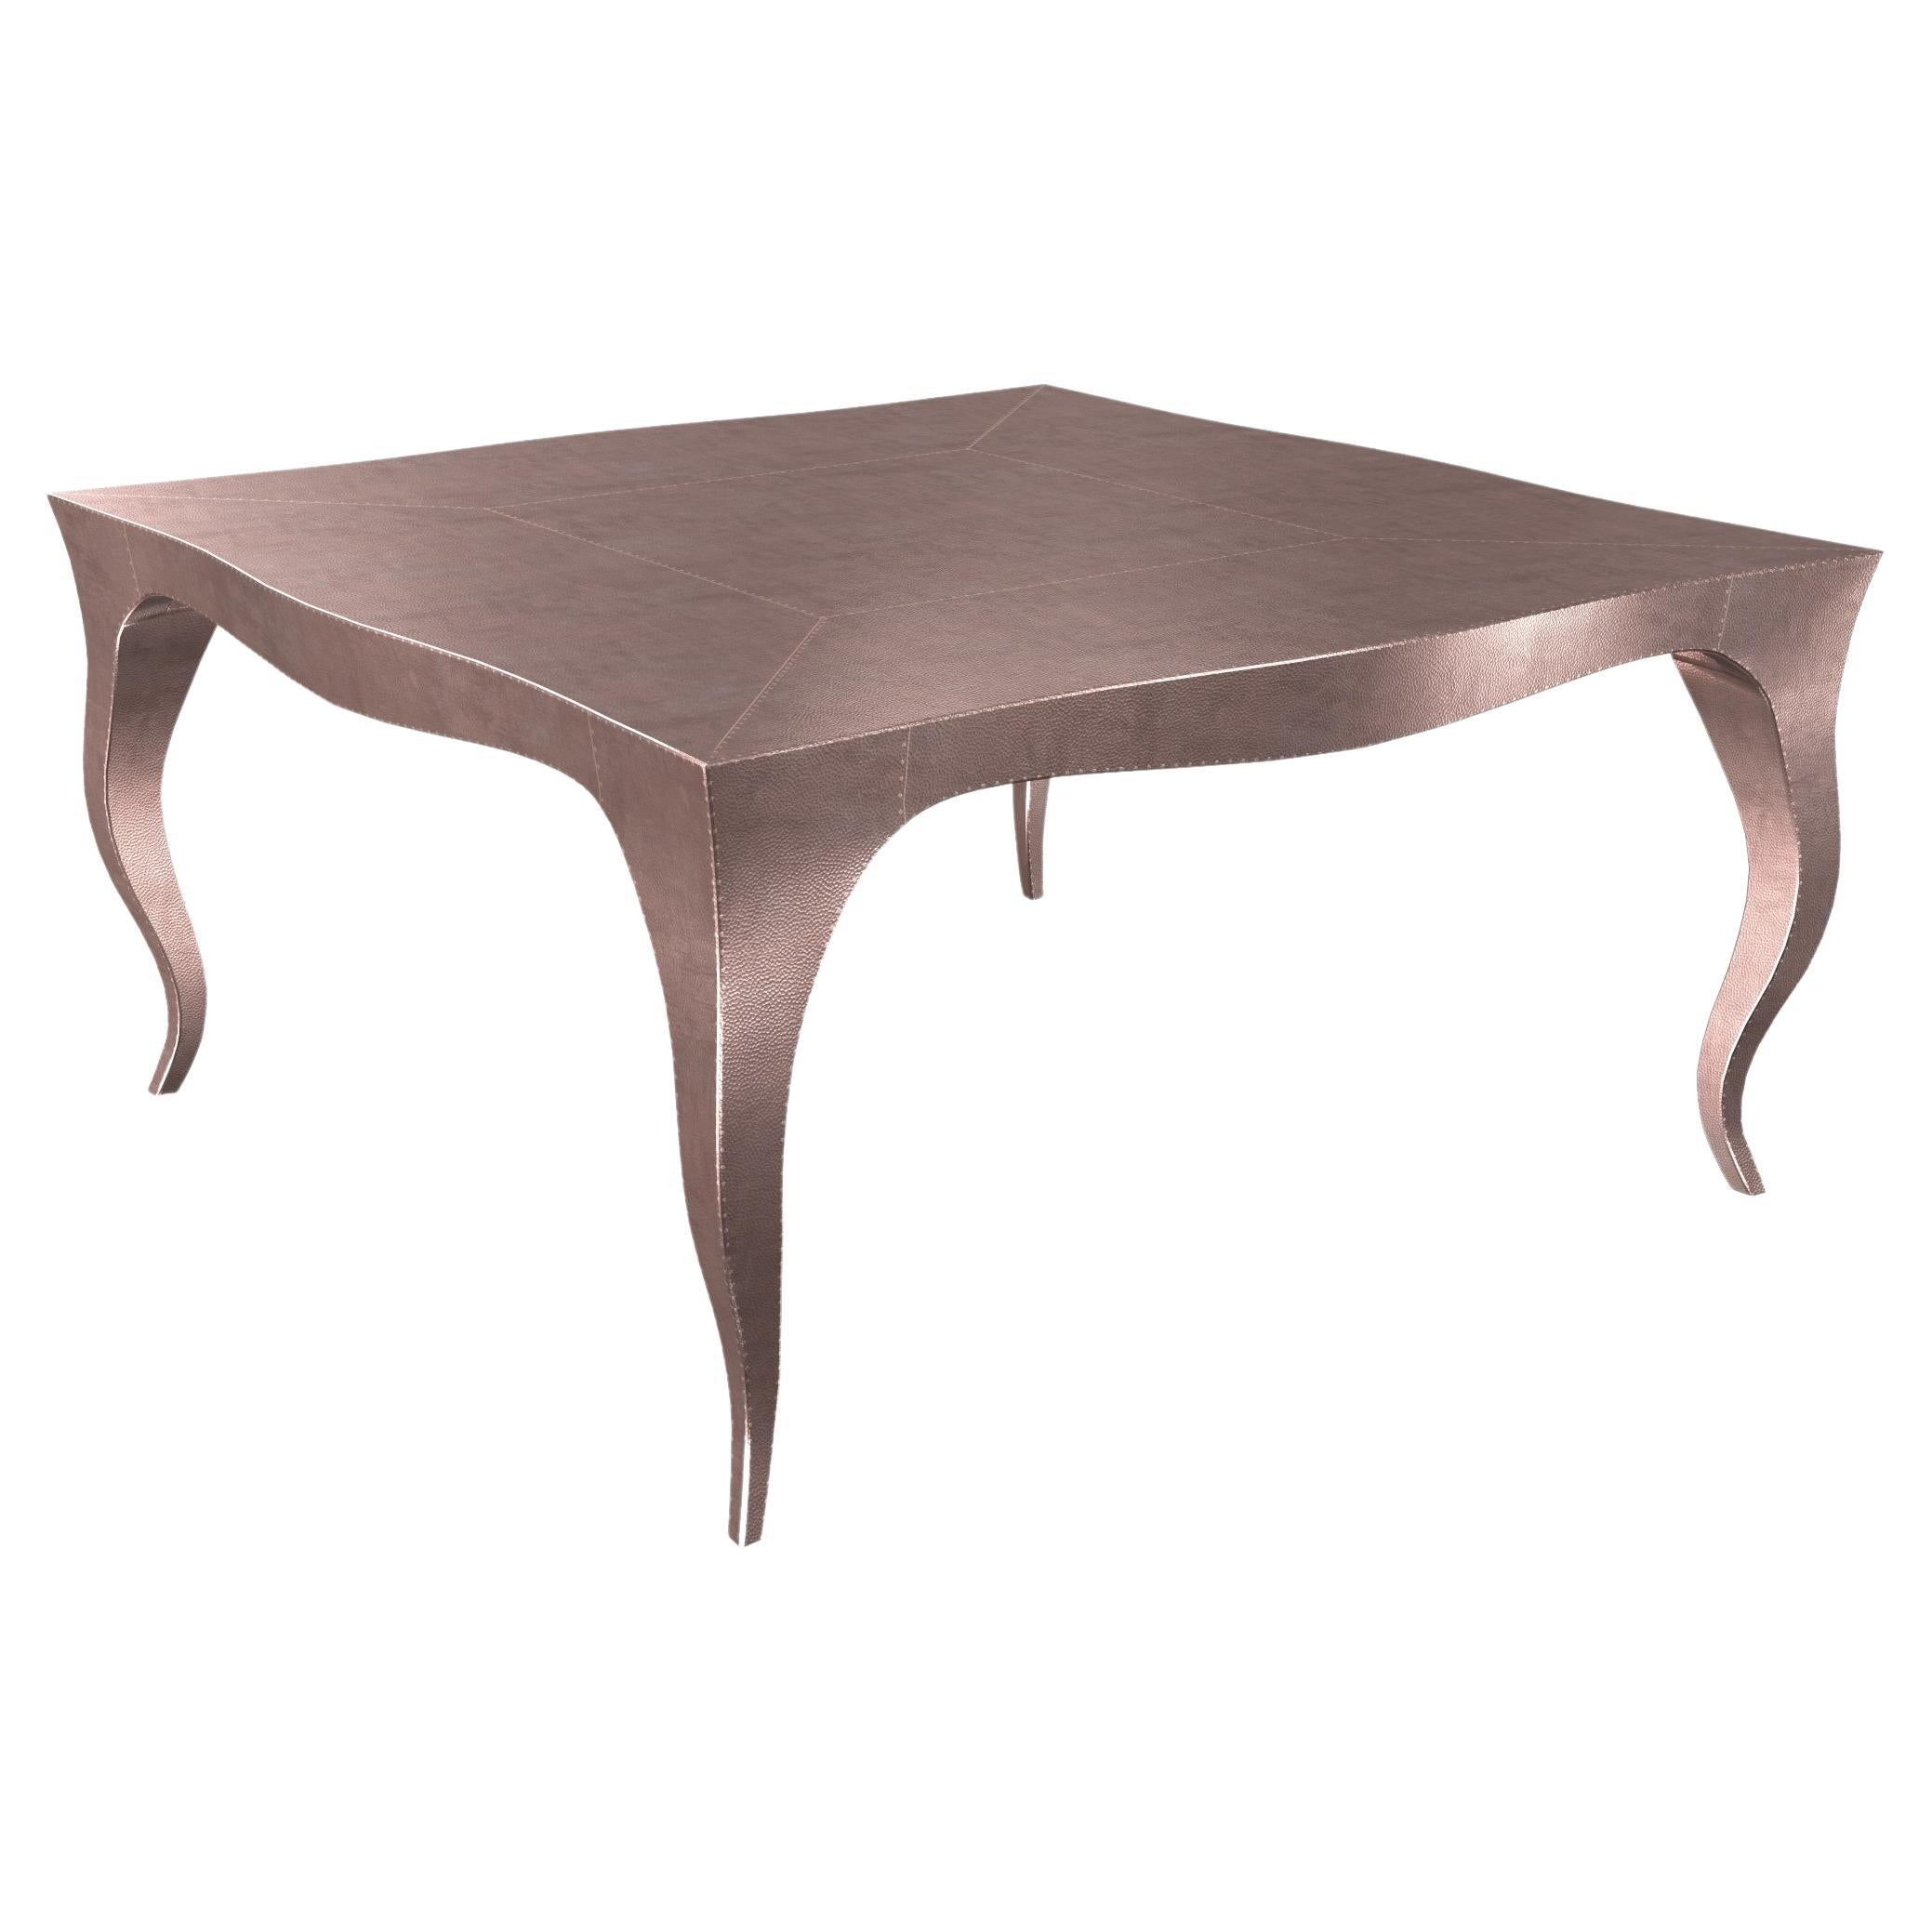 Louise Art Deco Industrial Table Mid. Hammered Copper 18.5x18.5x10 inch  For Sale